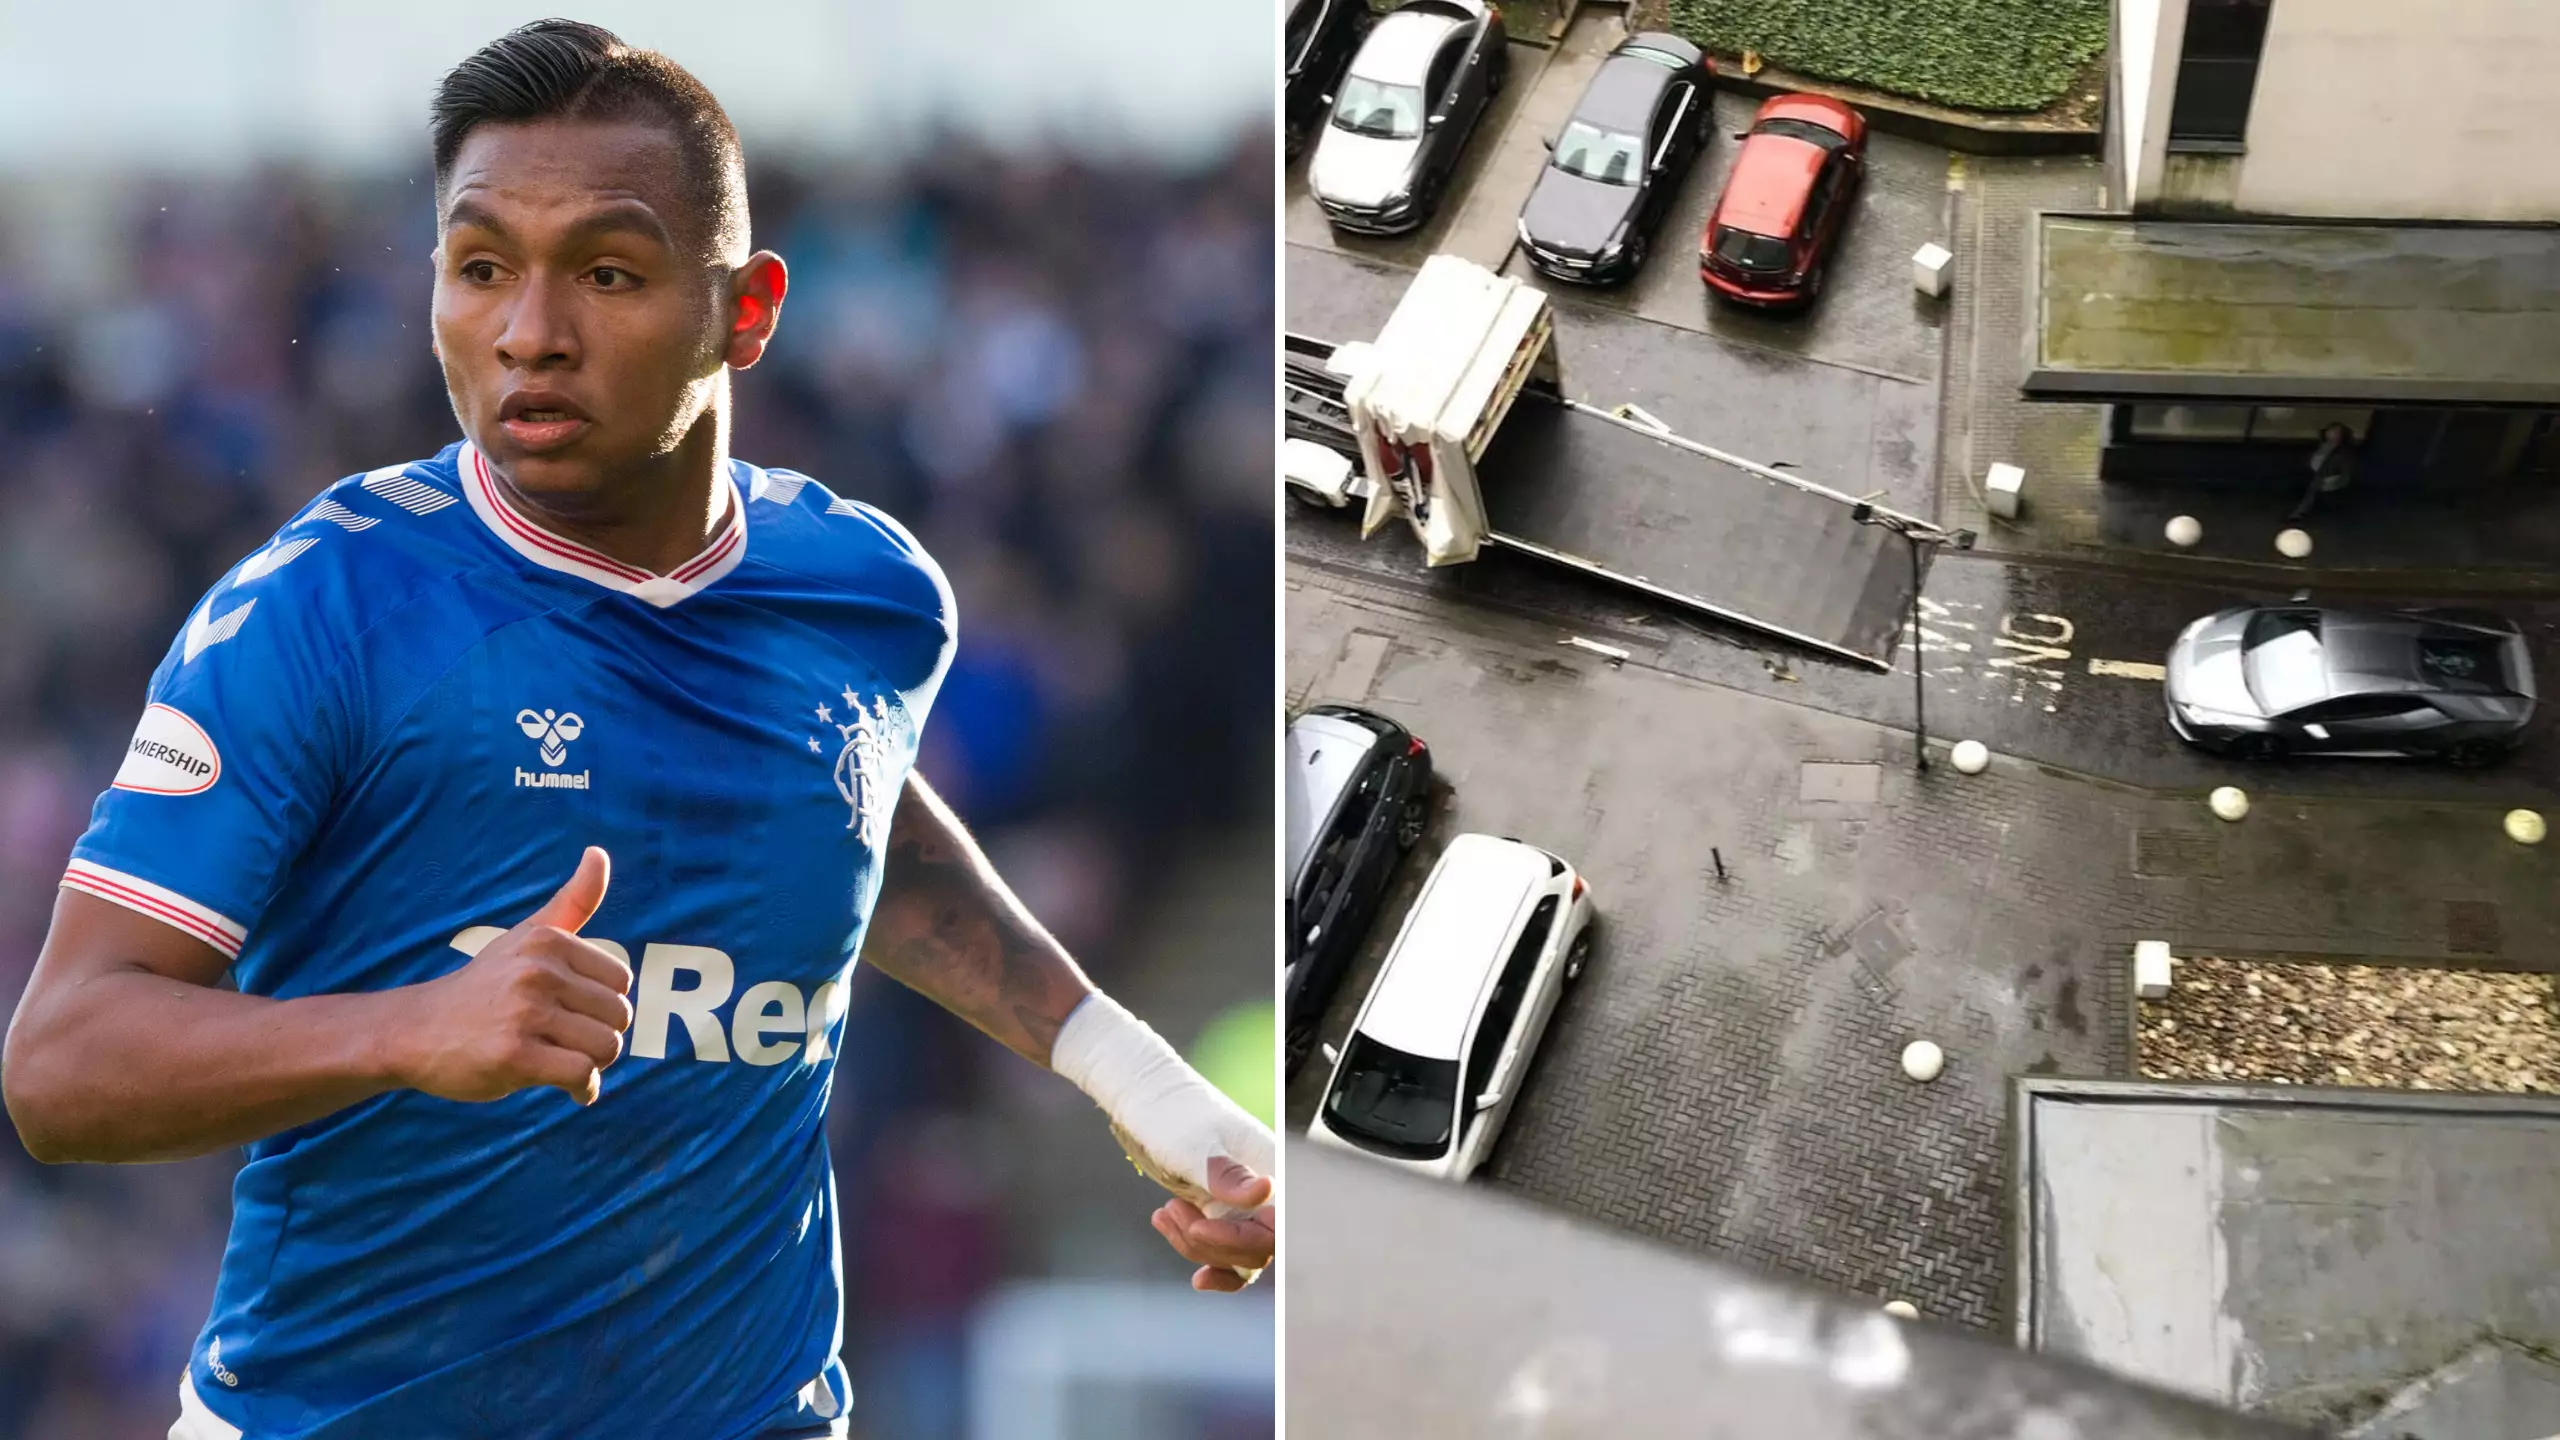 Rangers Striker Alfredo Morelos ‘Finds Suspicious Man Tampering With His Brakes'